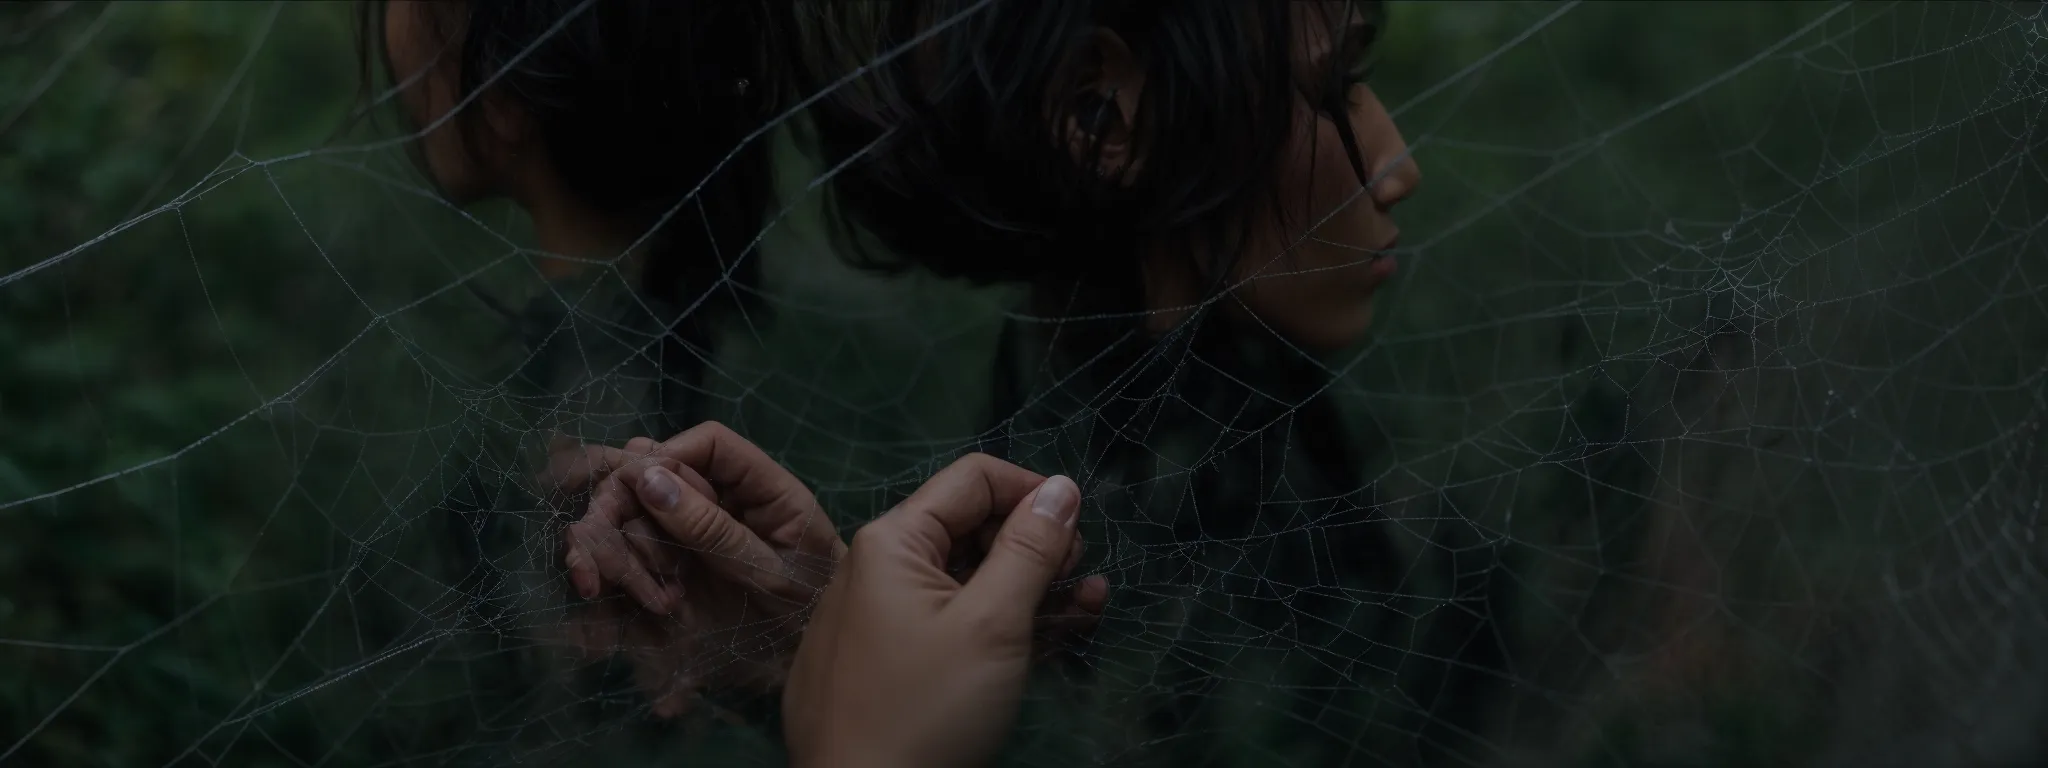 a person intently examining a large, tangled spider web, meticulously reconnecting severed strands.